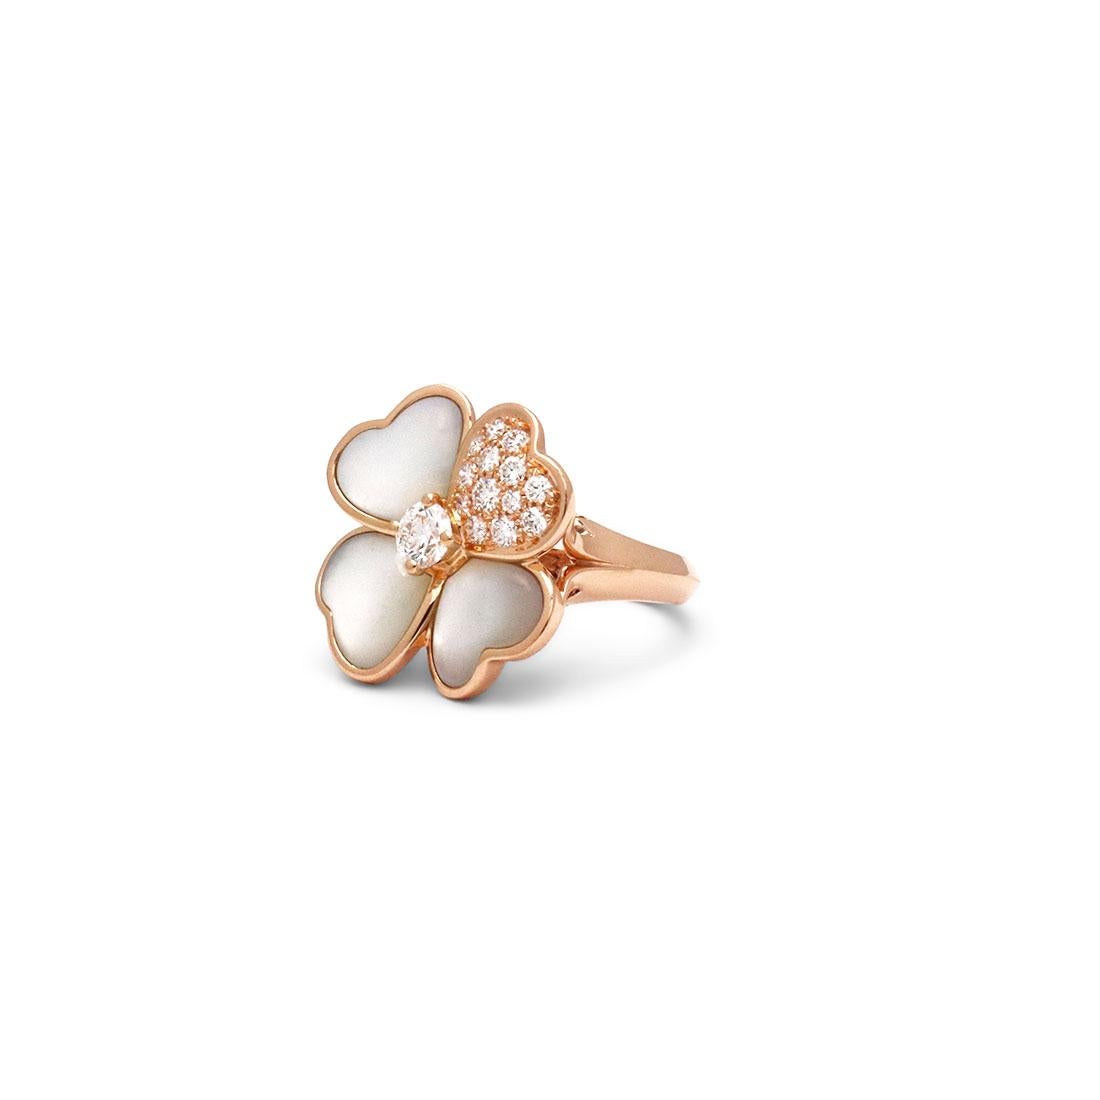 Authentic Van Cleef & Arpels Cosmos ring crafted in 18 karat rose gold is composed of four heart-shaped petals and a stunning centered diamond. Three of the petals are set with Mother-of-pearl stones while the fourth petal is set with 13 round